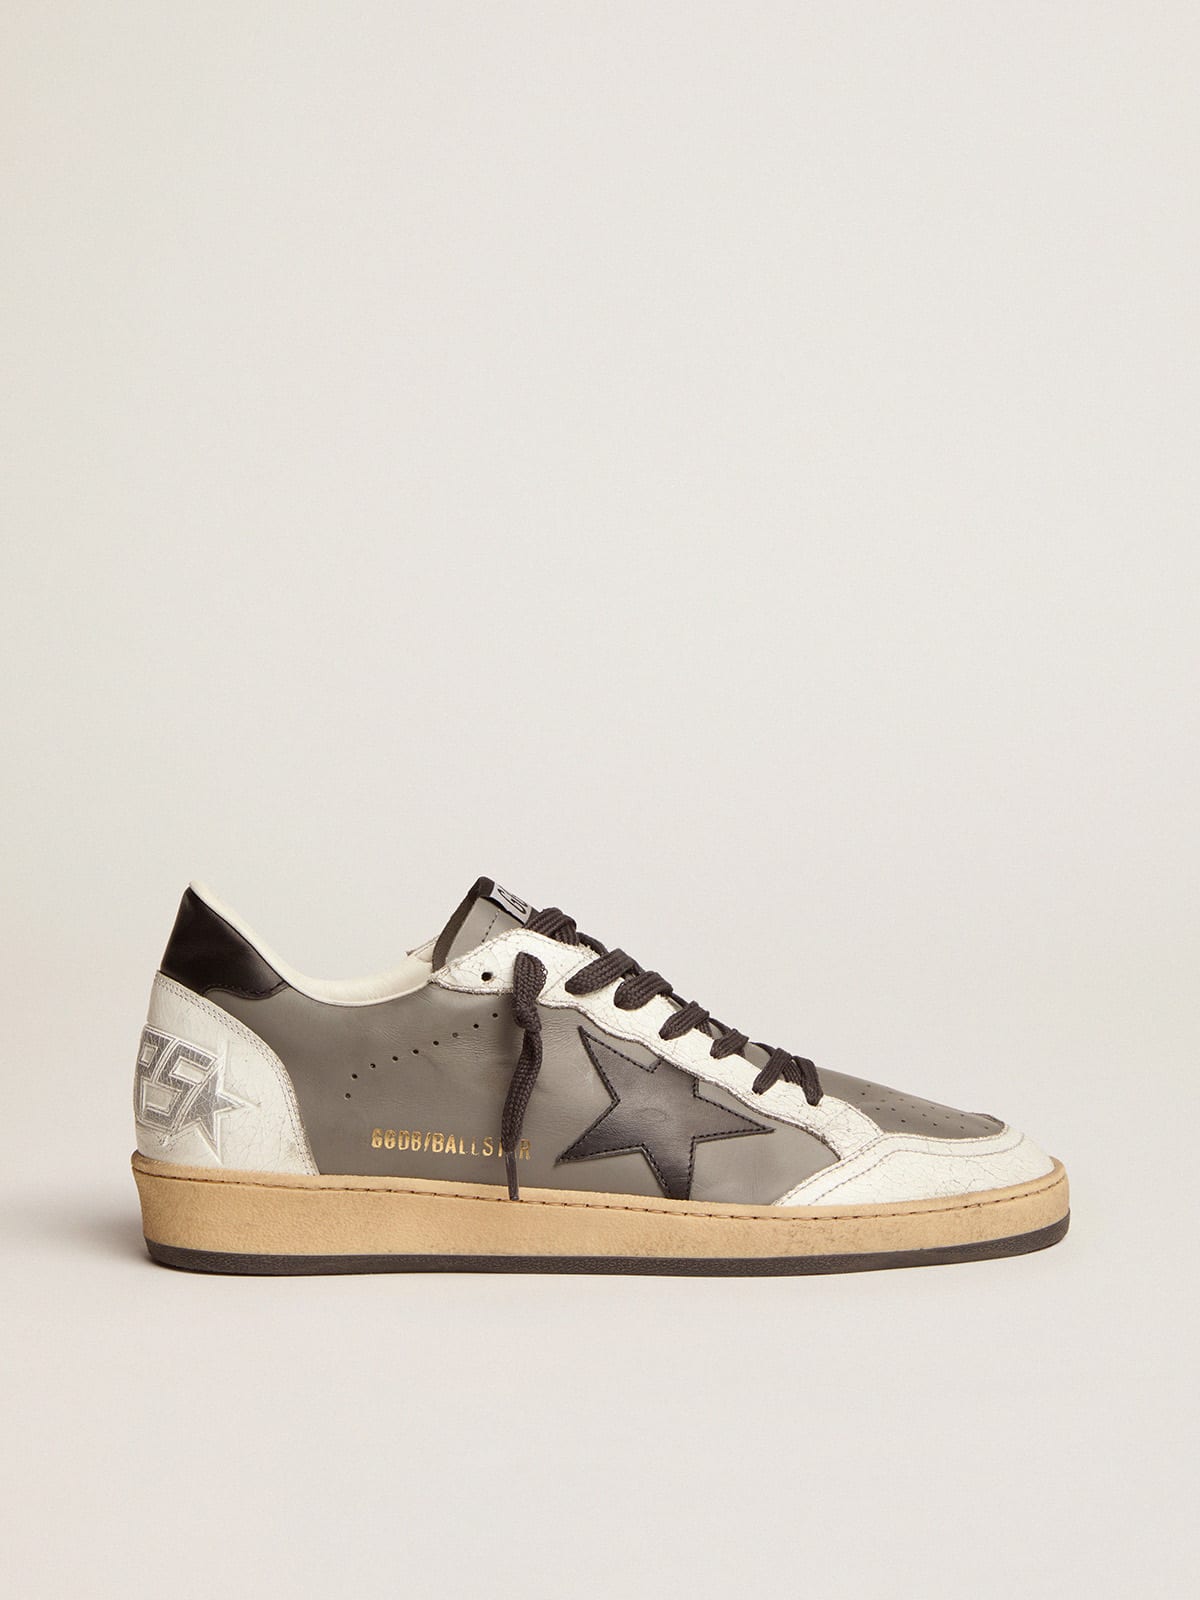 Golden Goose - Ball Star in gray leather with a black leather star and heel tab in 